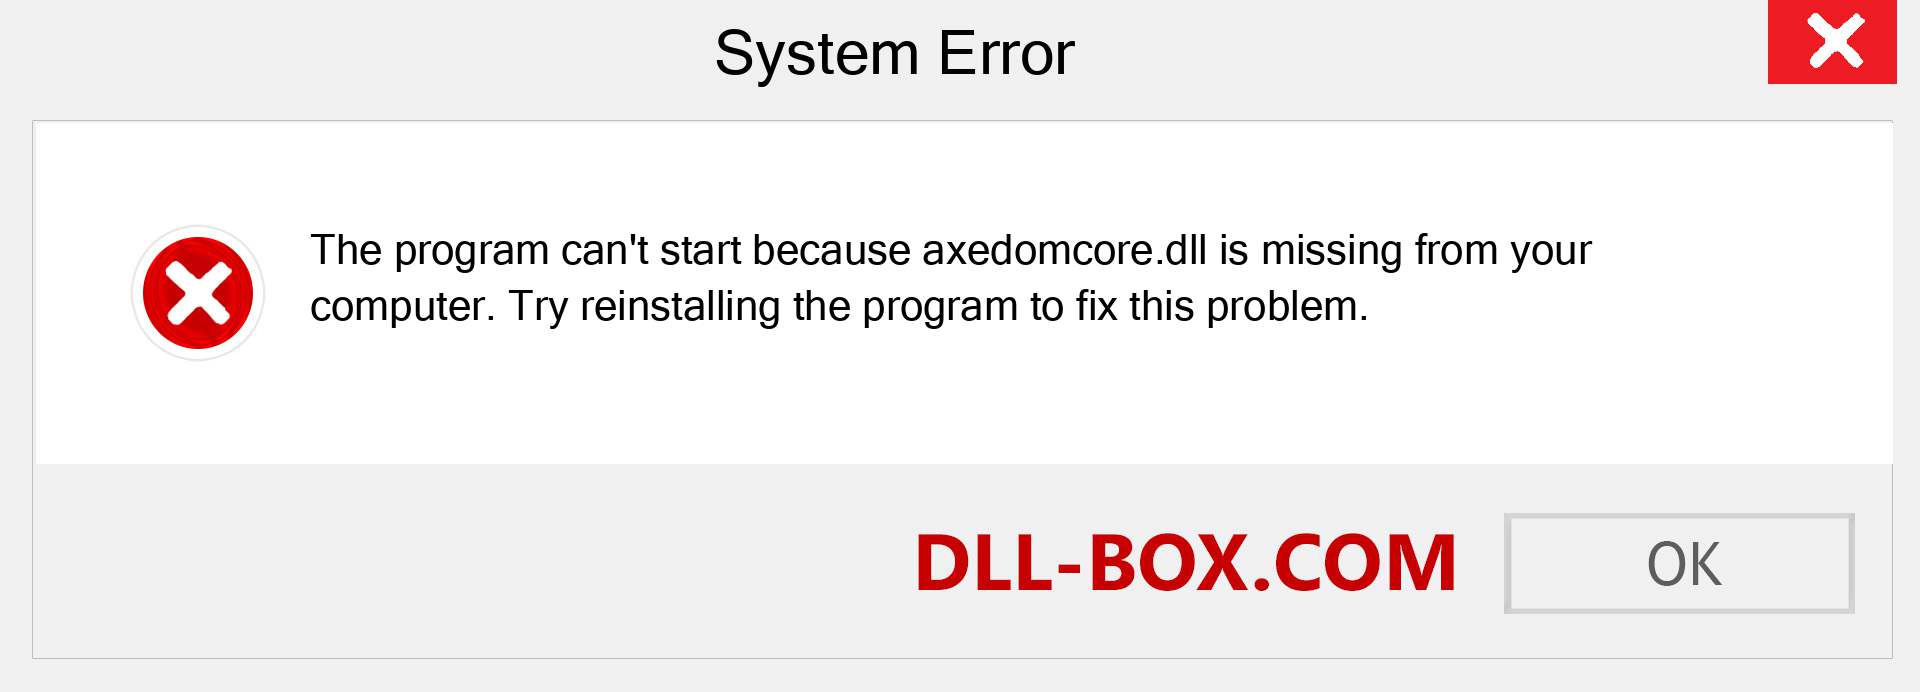  axedomcore.dll file is missing?. Download for Windows 7, 8, 10 - Fix  axedomcore dll Missing Error on Windows, photos, images